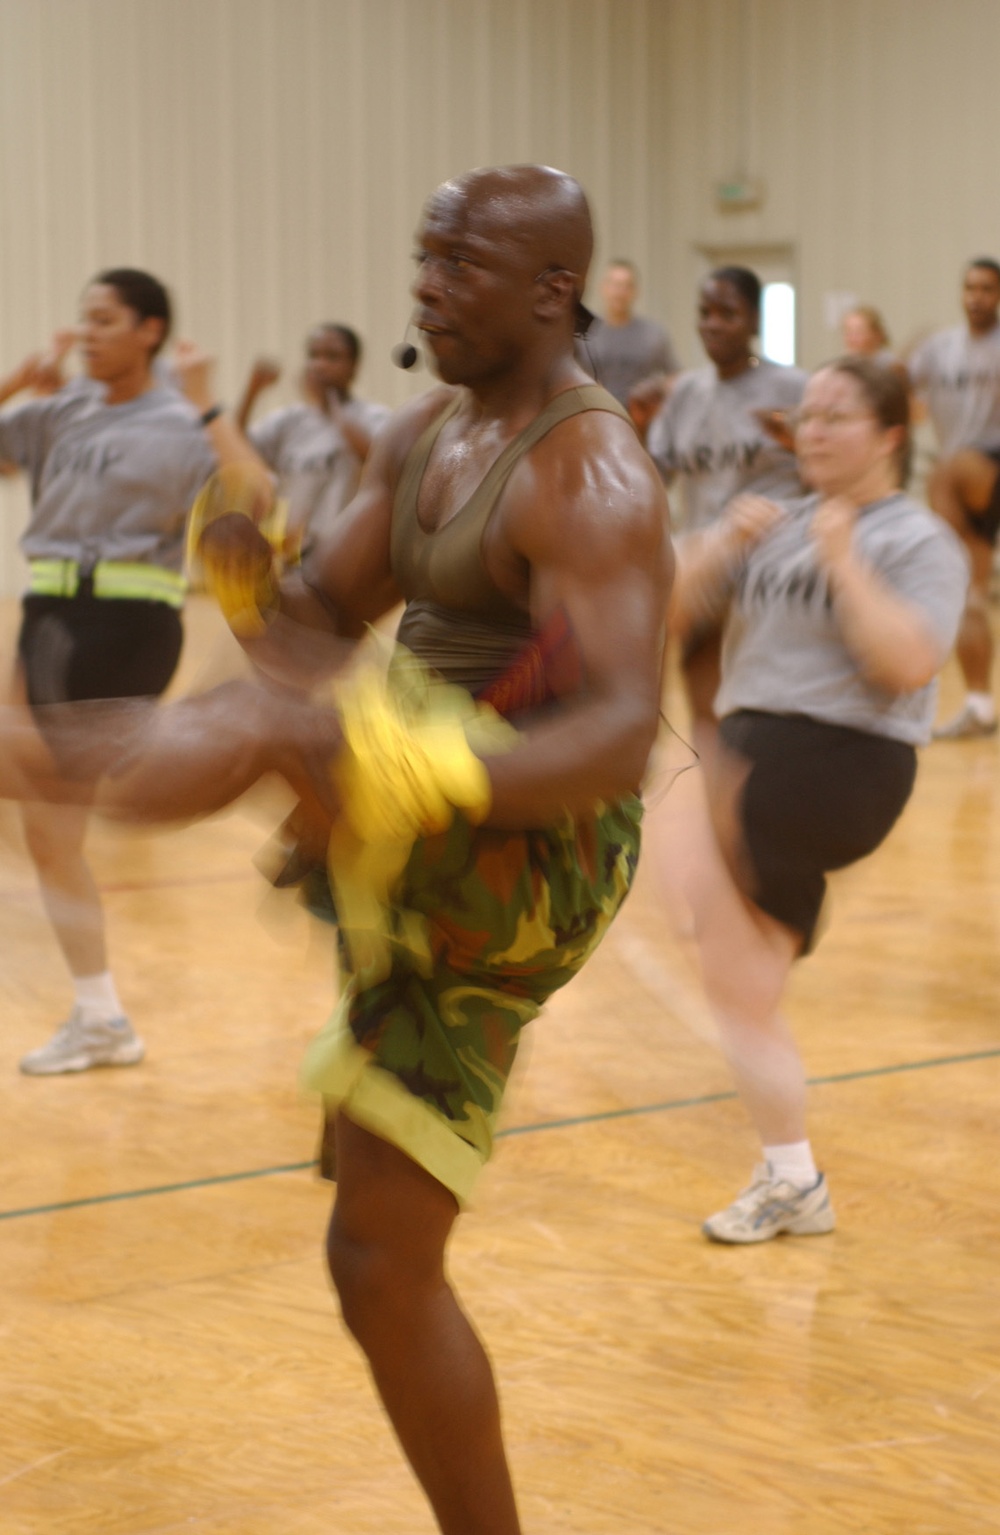 DVIDS - Images - Billy Blanks Works Out With MND-B Soldiers at 'Spirit and  Body Tour' [Image 2 of 7]